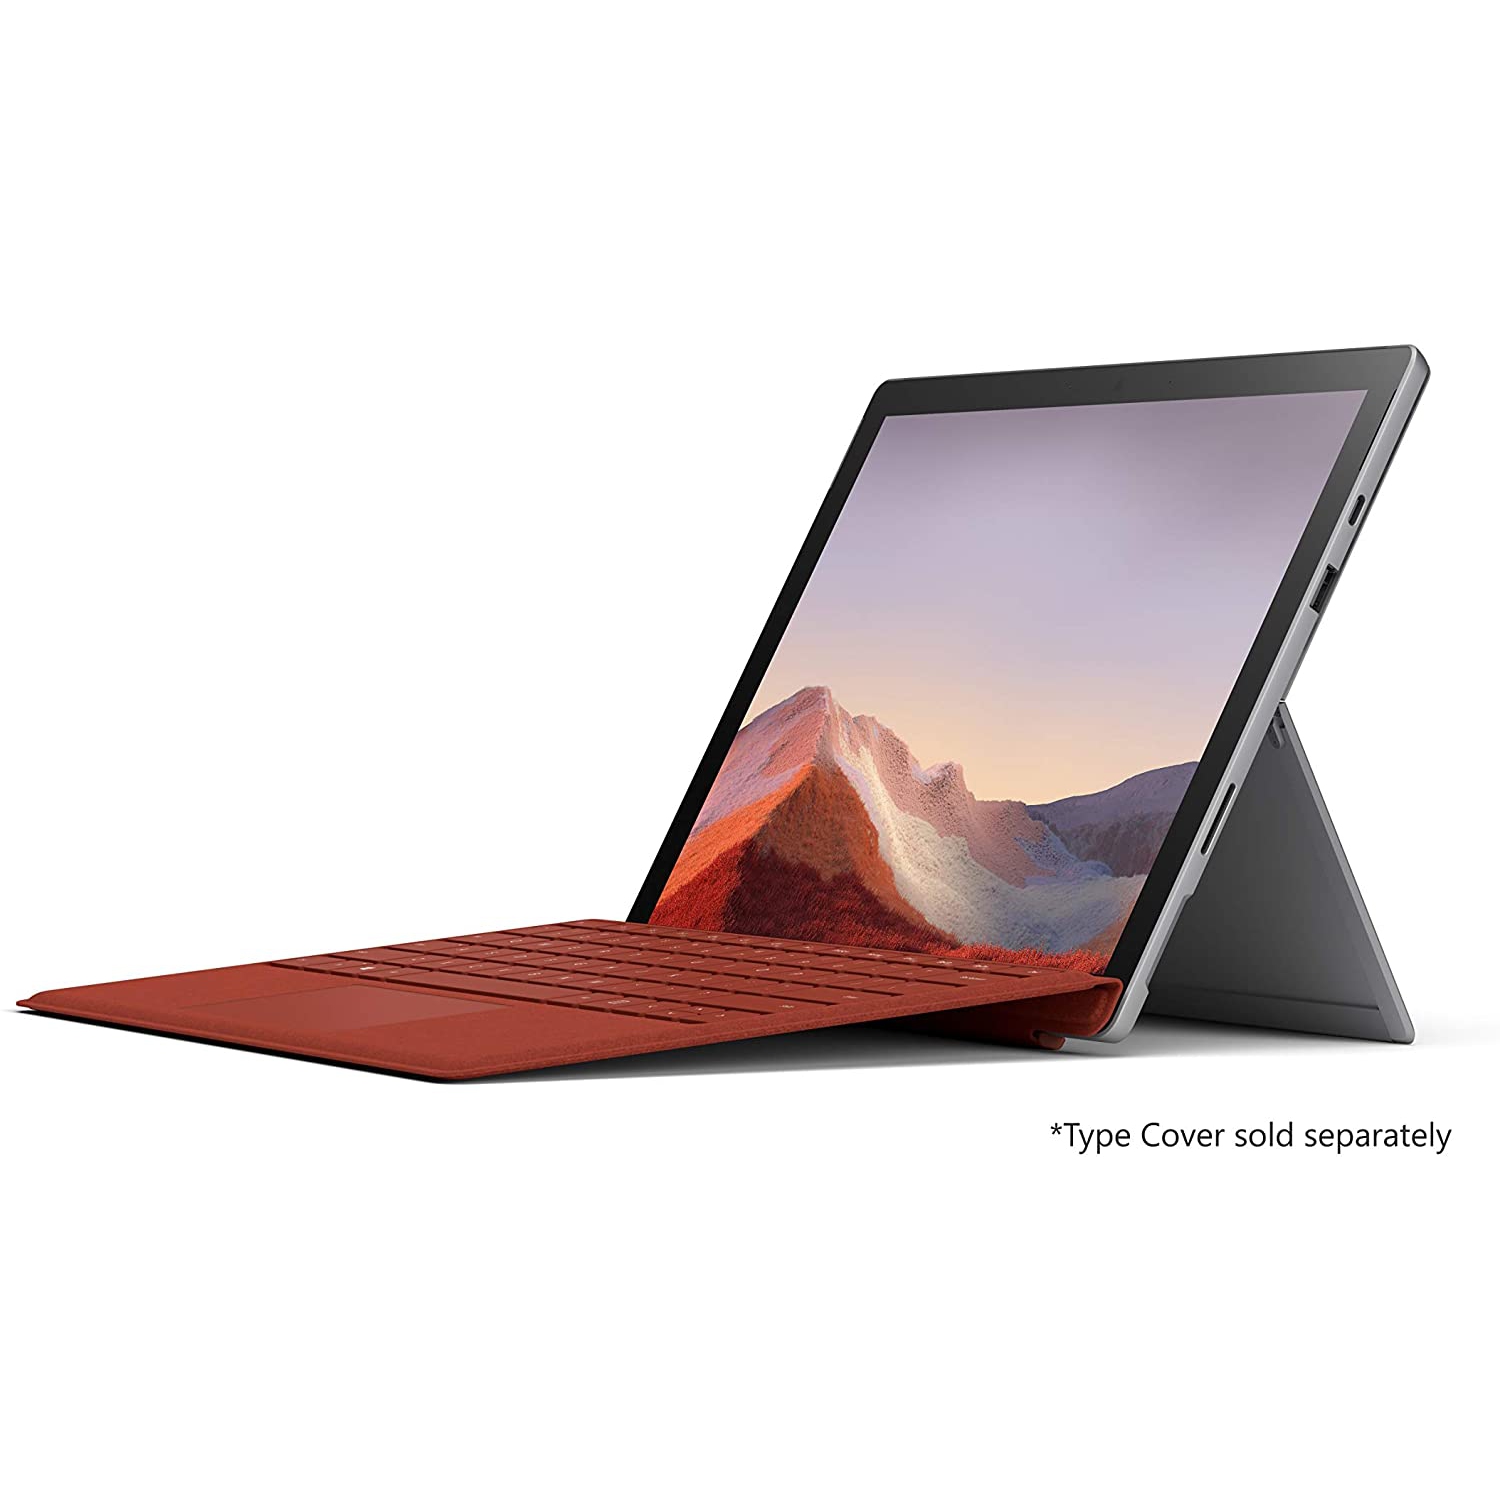 Refurbished (Excellent) - Microsoft Surface Pro 7 12.3" Windows 10 Tablet with 10th Gen Intel Core i5, 8GB RAM, 128GB SSD - Manufacturer Factory Recertified (1-Year Microsoft Warranty)